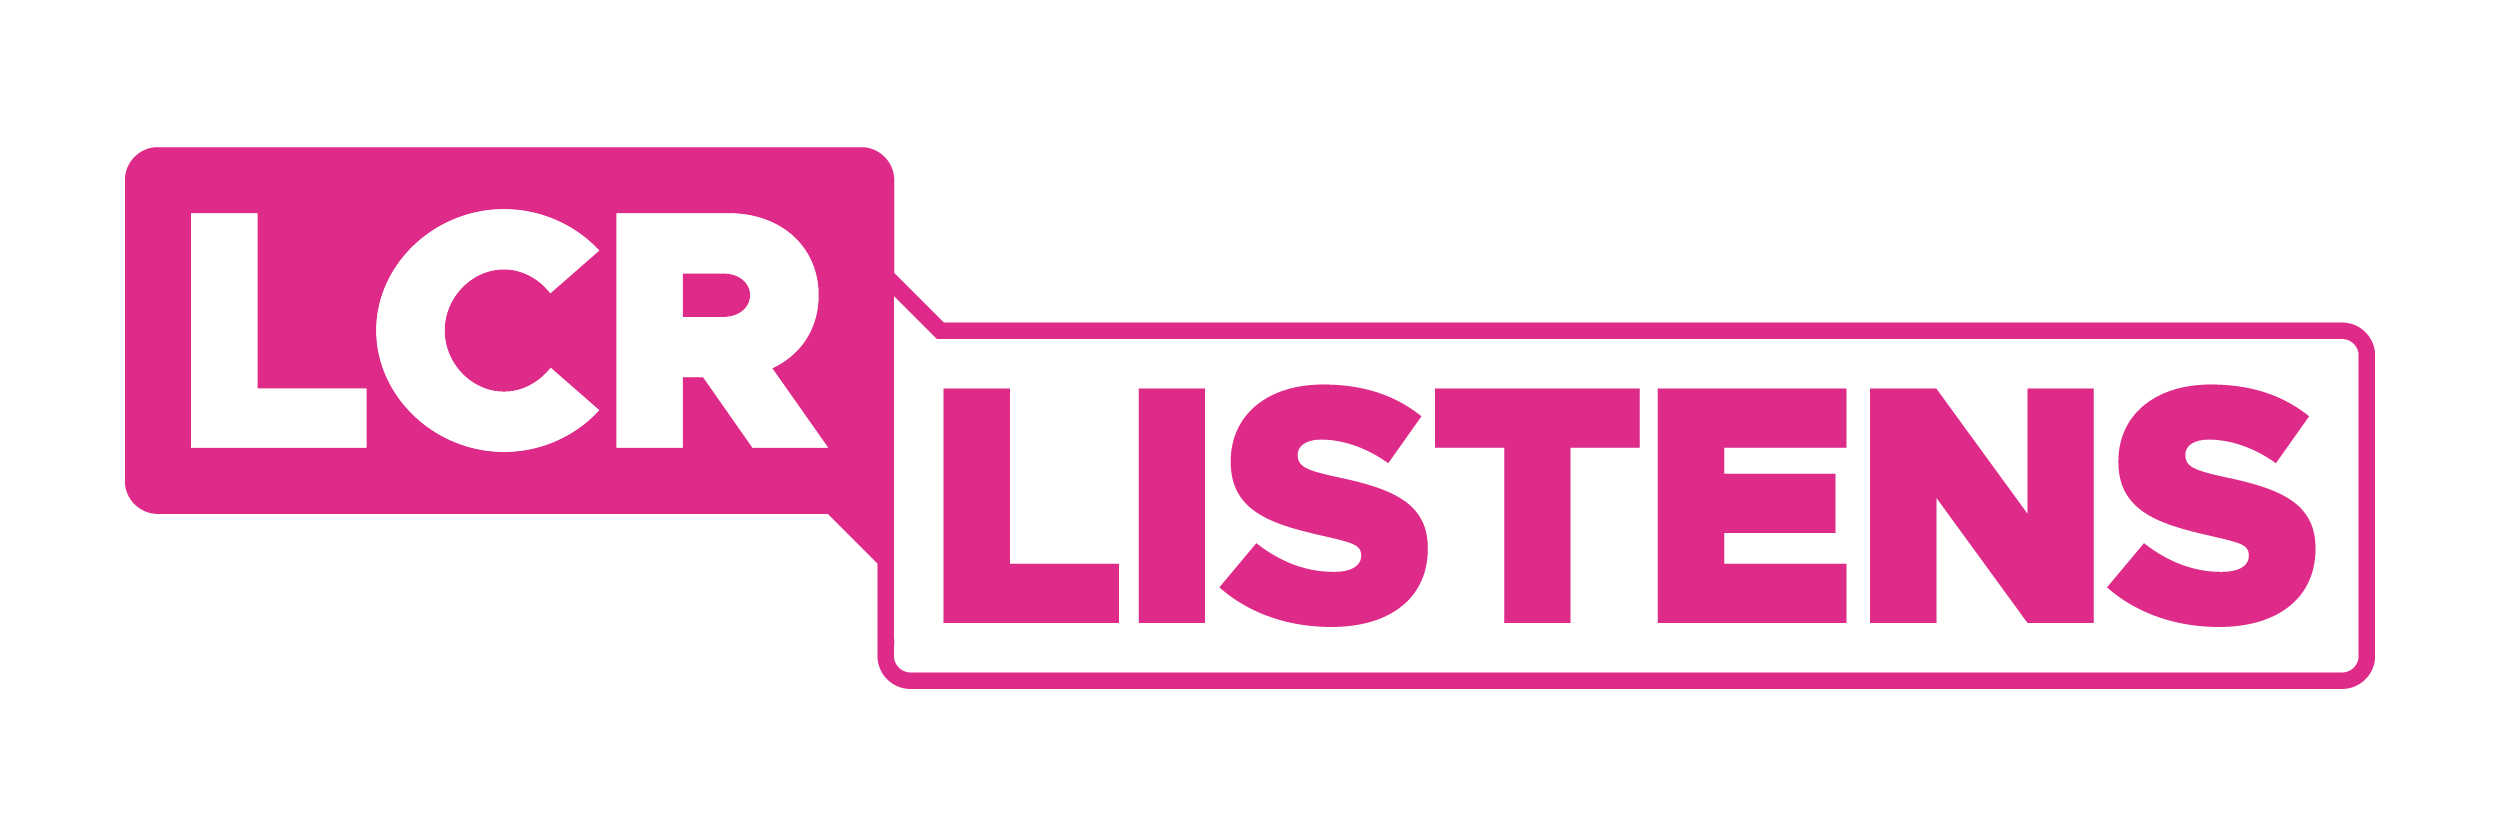 Pink and white LCR Listens logo.